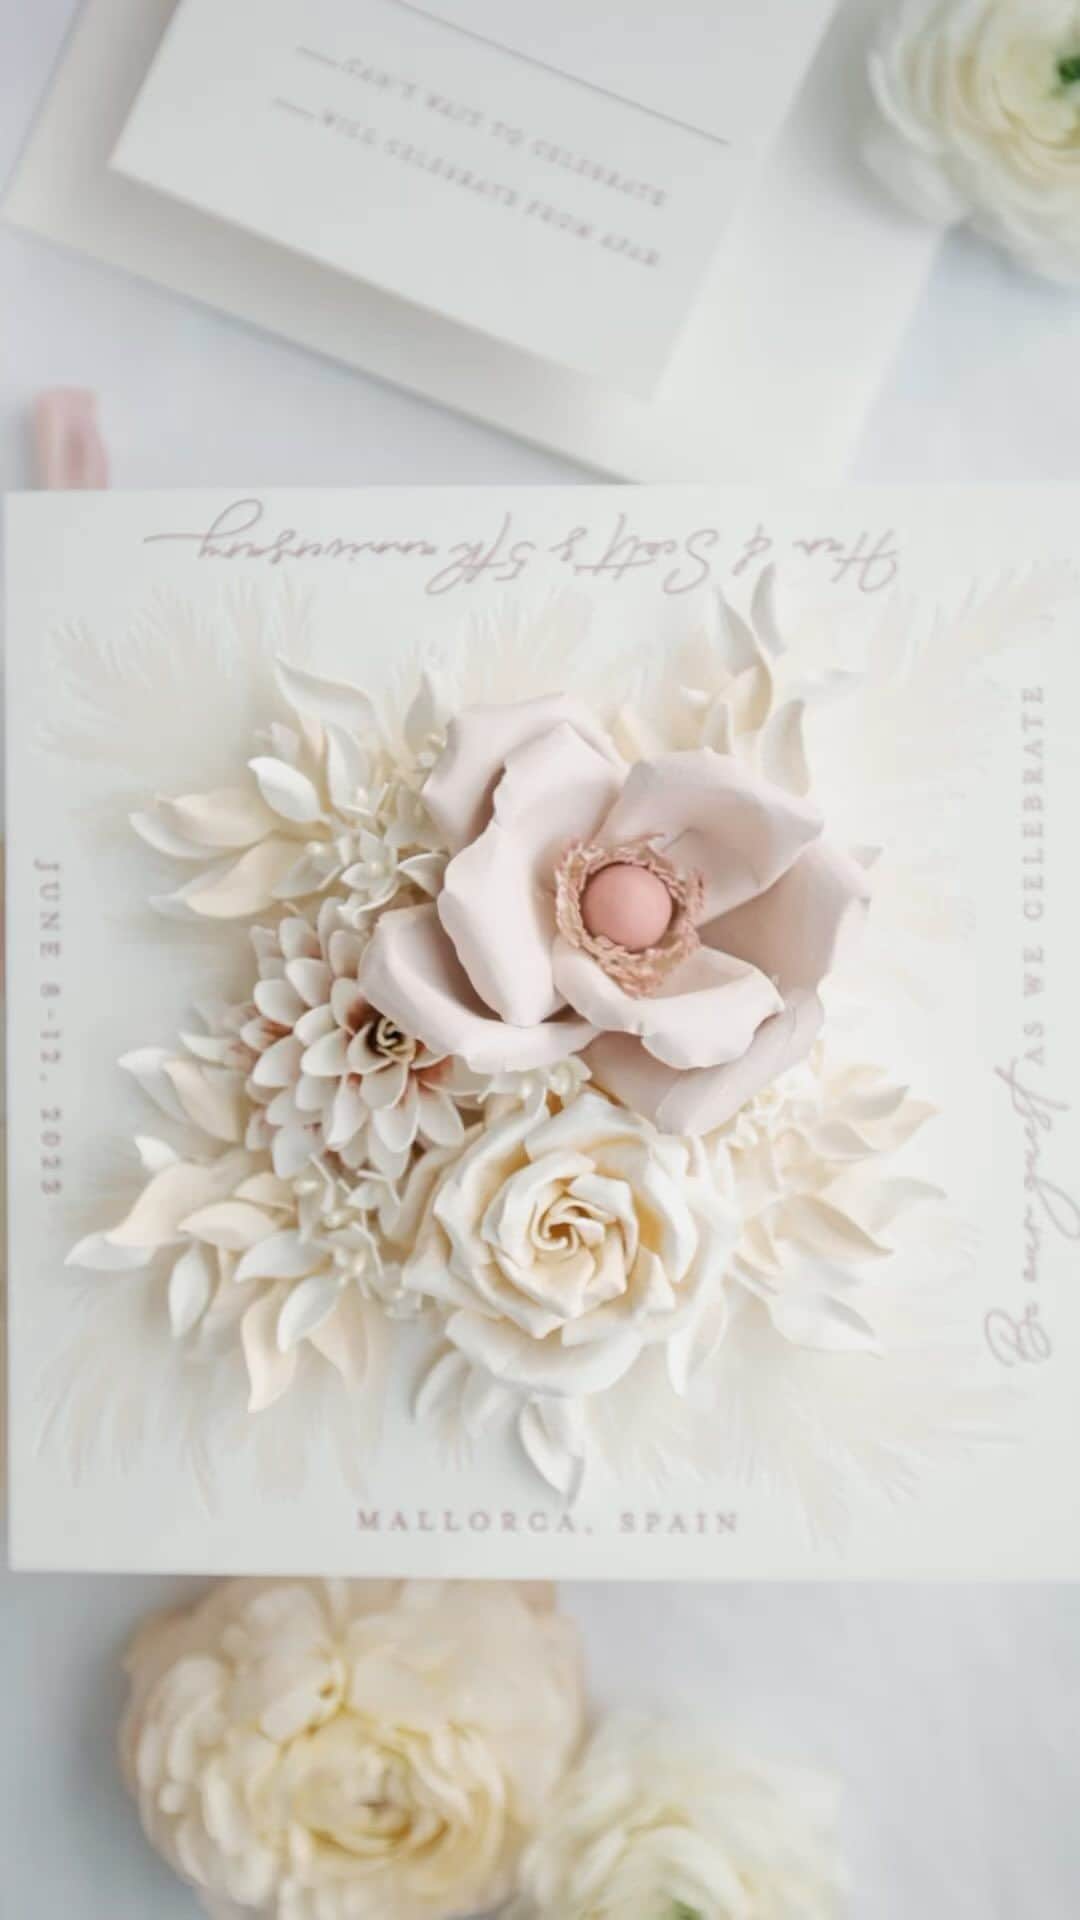 Ceci Johnsonのインスタグラム：「ANNIVERSARY | Dive into the artistry of our couture invitation designed for Han & Scott’s 5th anniversary in Mallorca, Spain. From the delicate hand-made, hand painted paper flowers to the pink flora wax seal, every detail whispers luxury and romance.  #CeciCouture   #anniversarycelebration #luxuryinvitations #loveindetails #luxuryanniversary #coutureinvitations #luxuryparty #anniversary」